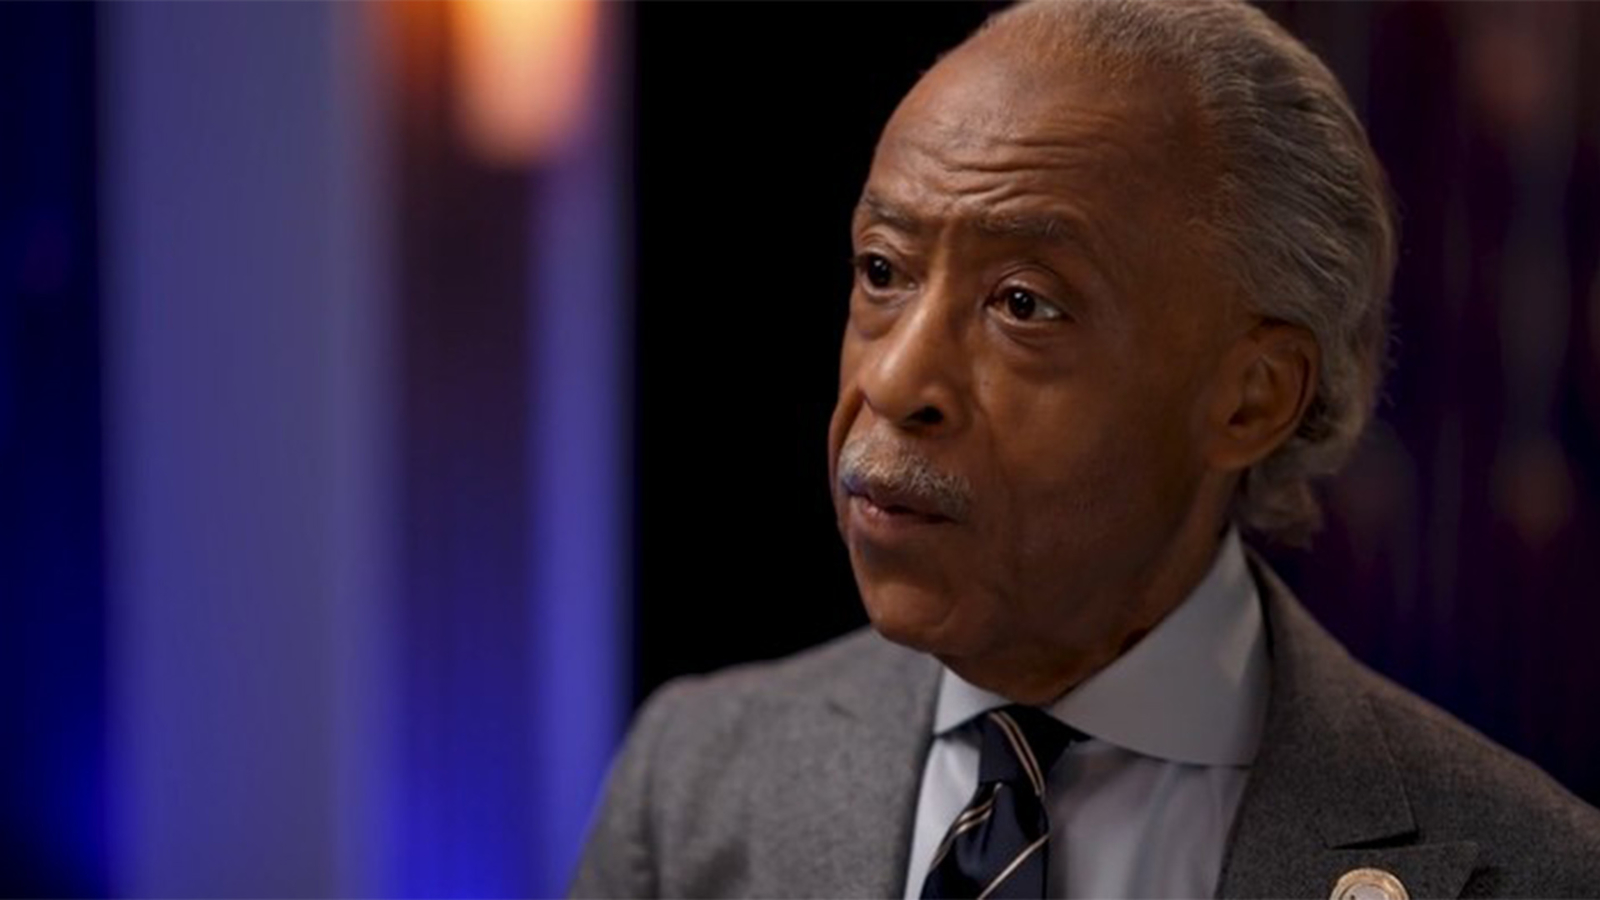 Reverend Al Sharpton calls out high unemployment rate for Black New Yorkers, wants more contracts for Black businesses [Video]